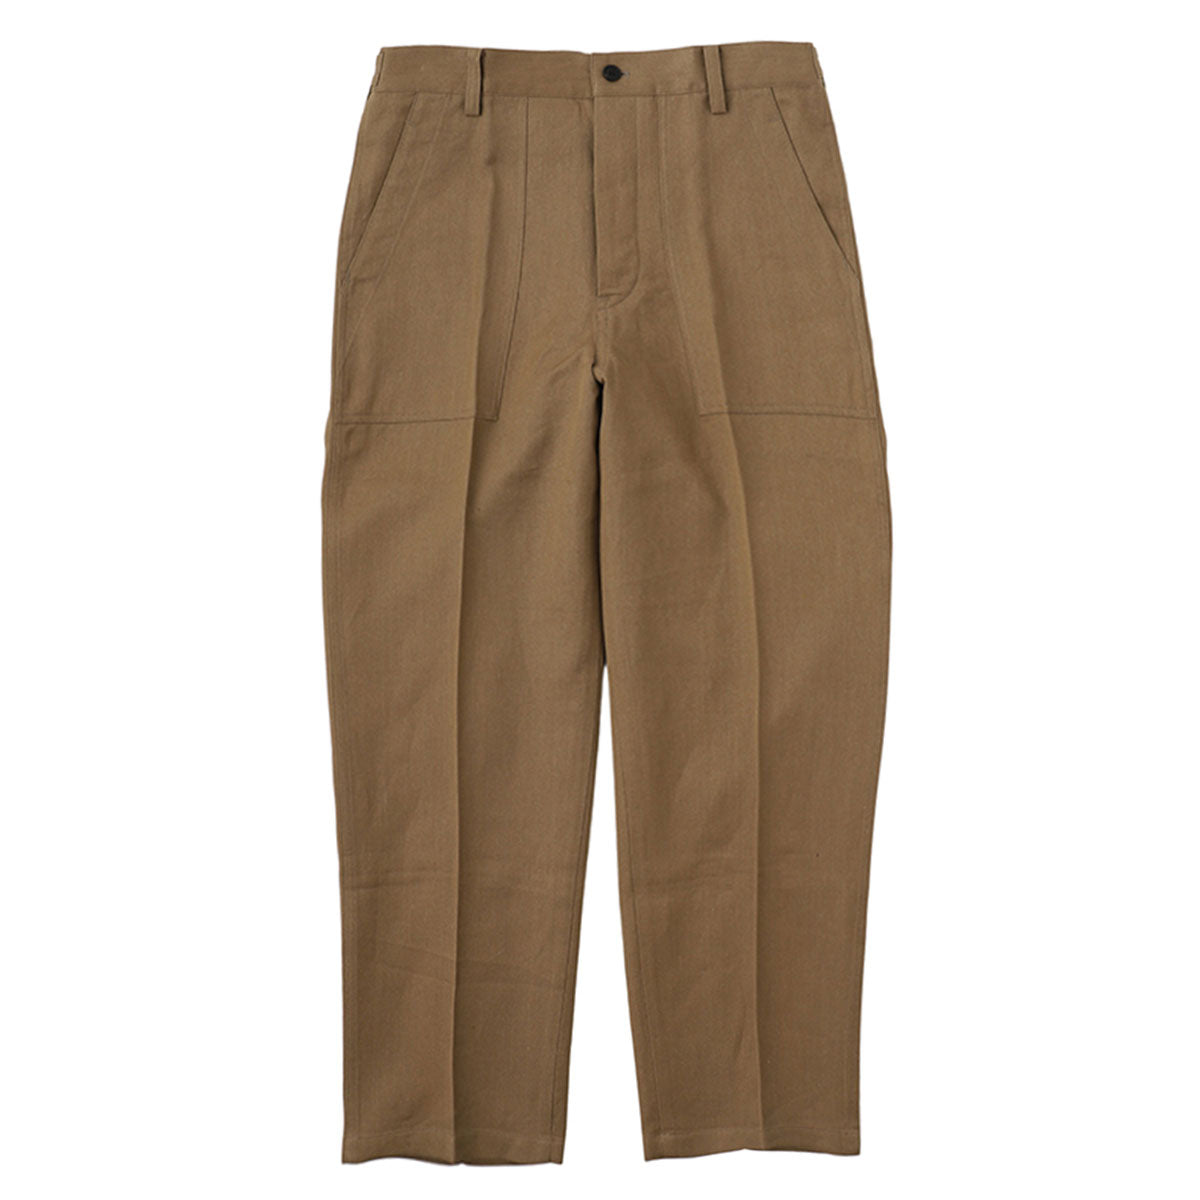 ALDA PANTS (L/W) - Why are you here?